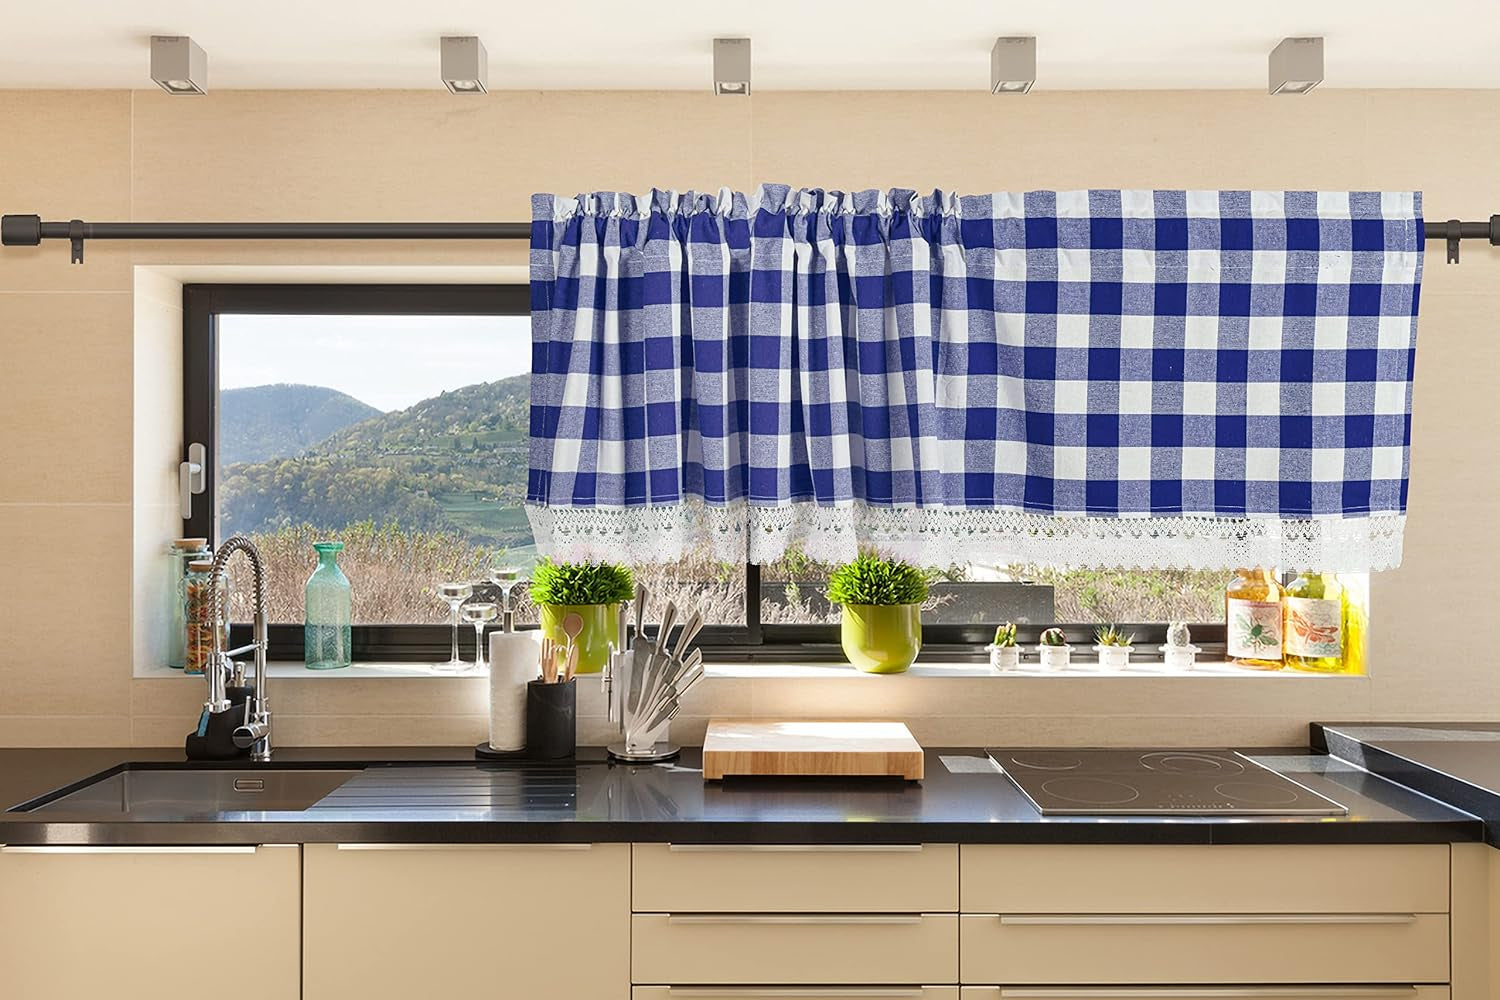 Navy and White Valance, Valances, Navy Check Valance, 2 Inch Rod Pocket Valances for Windows, Valance for Kitchen, Bath, Bed and Dining Room, 2Pack Gingham Check Valance with Lace-16X72 Inch